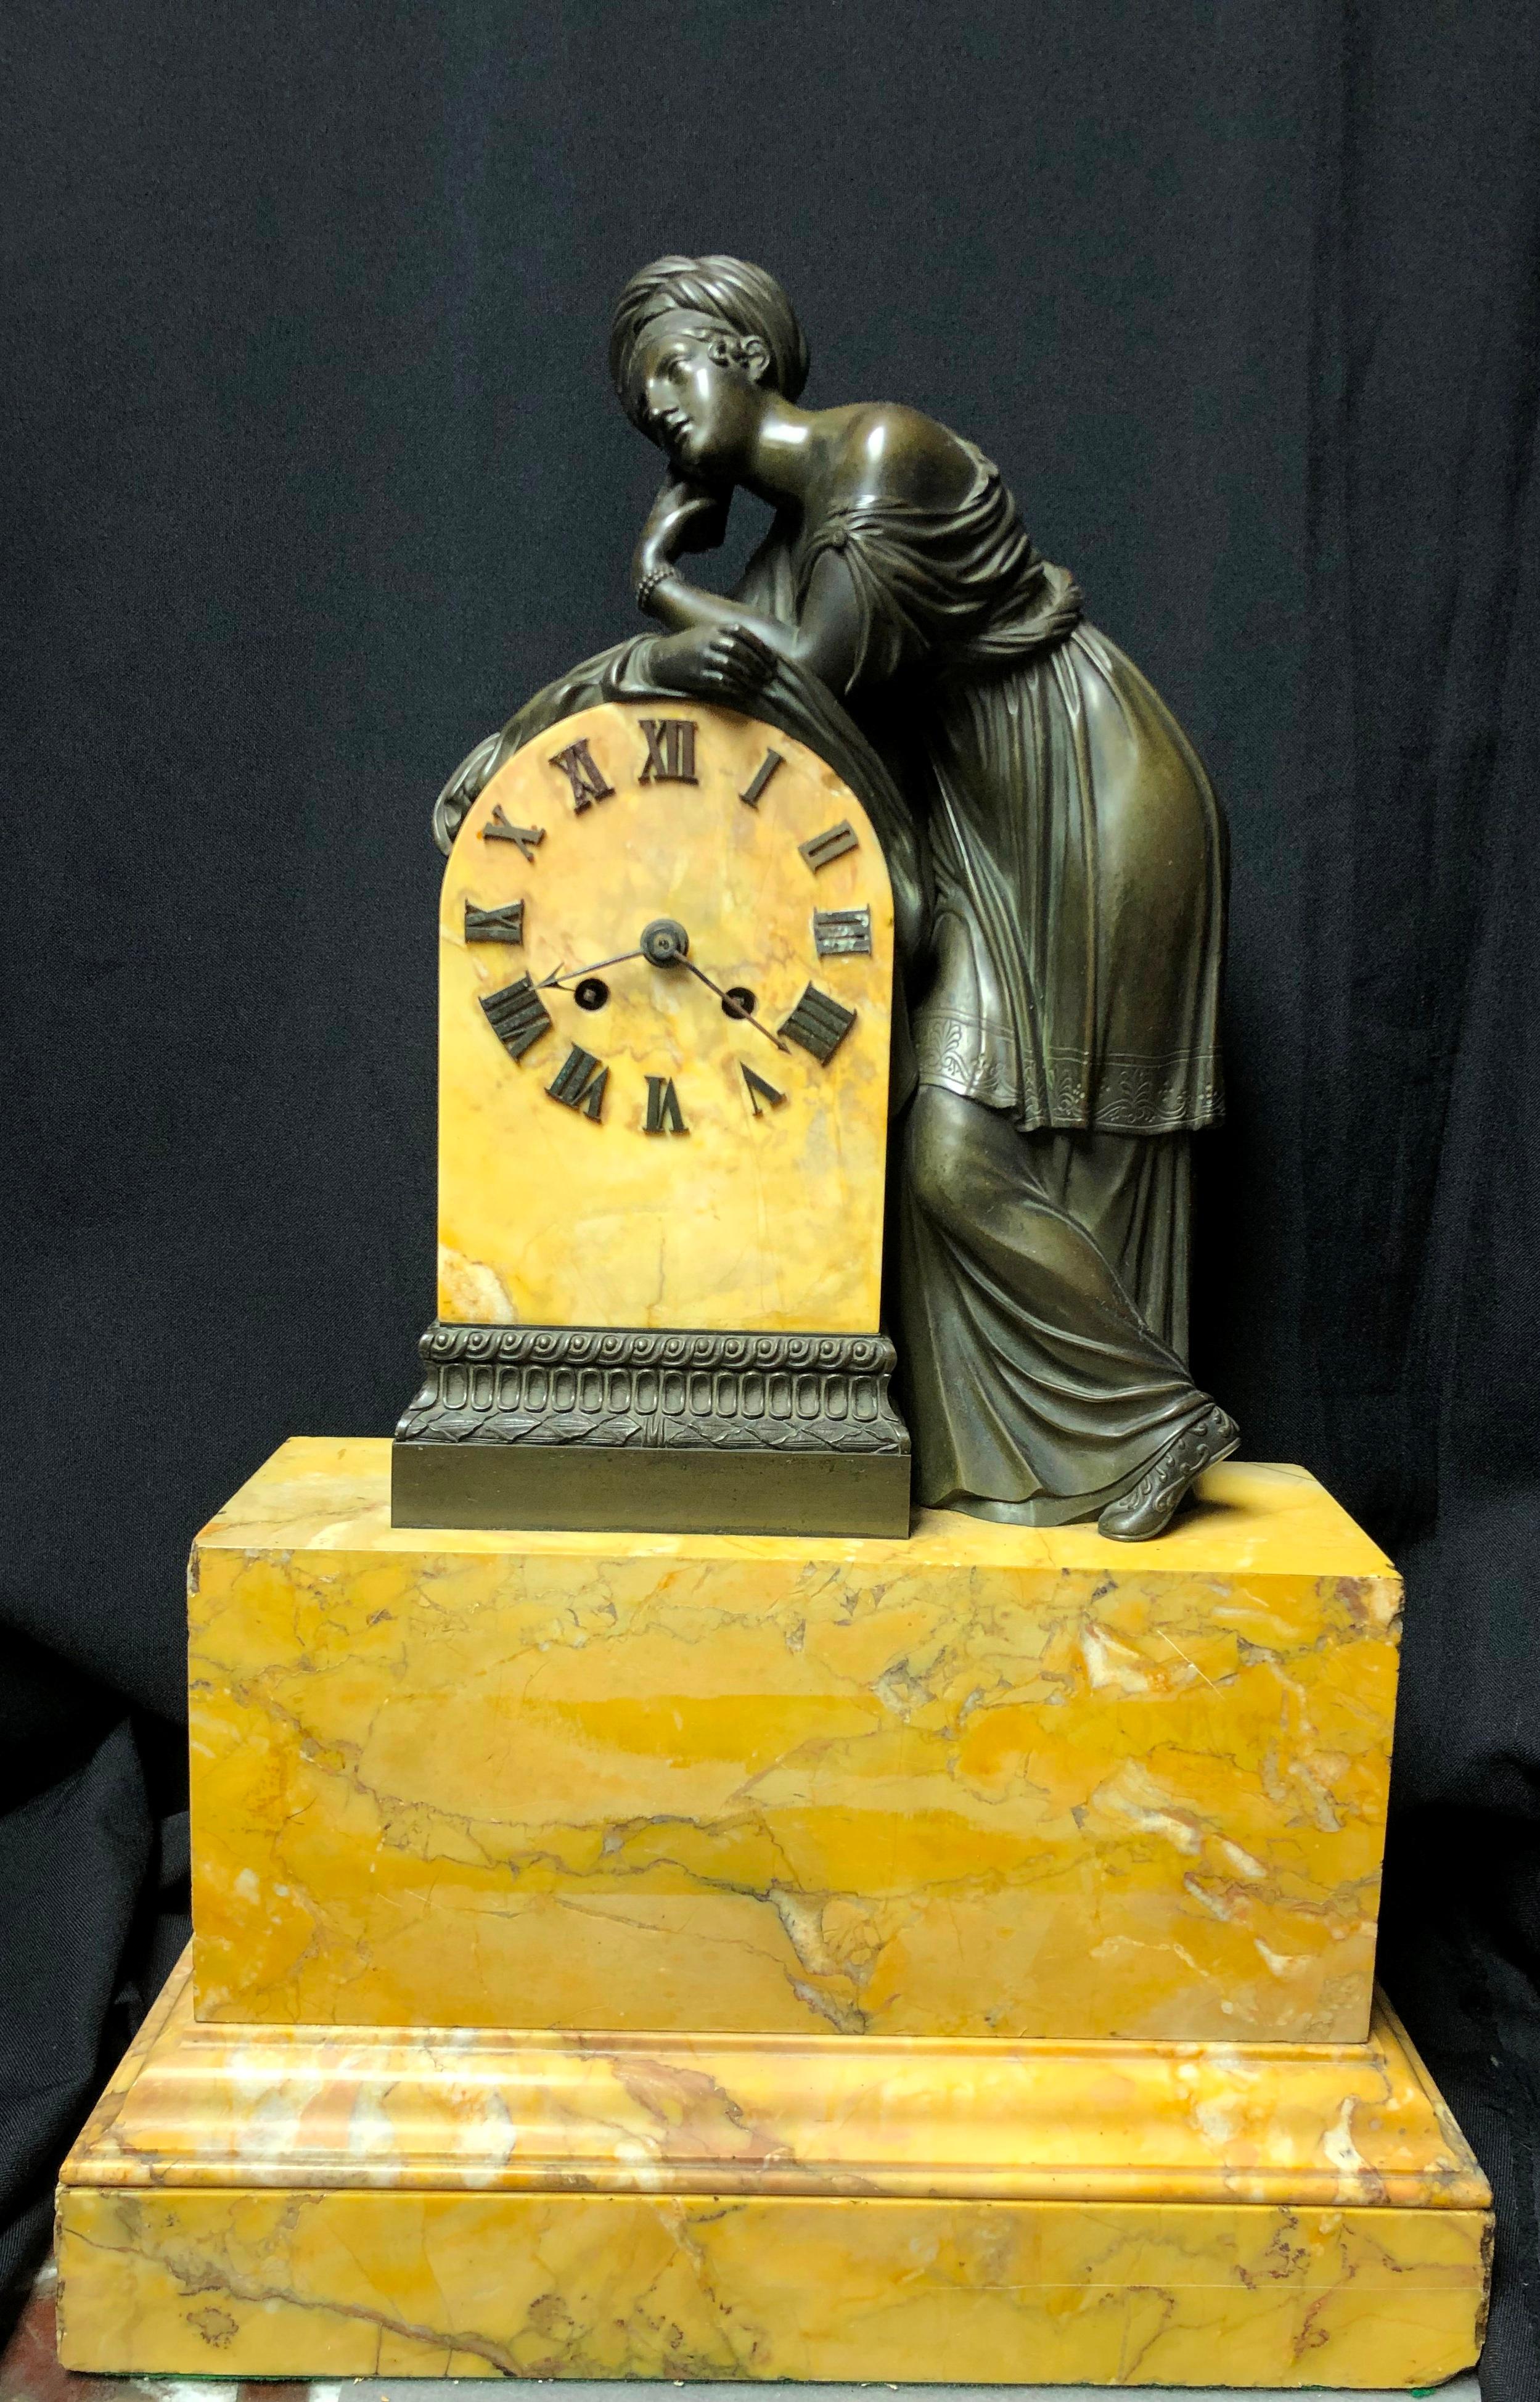 Lovely French Charles X patinated and sienna marble mantel clock.
A beautiful Neoclassical patinated bronze standing woman leaning on the clock, standing on Sienna marble plinth. 
The clock mechanism is not guaranteed.  